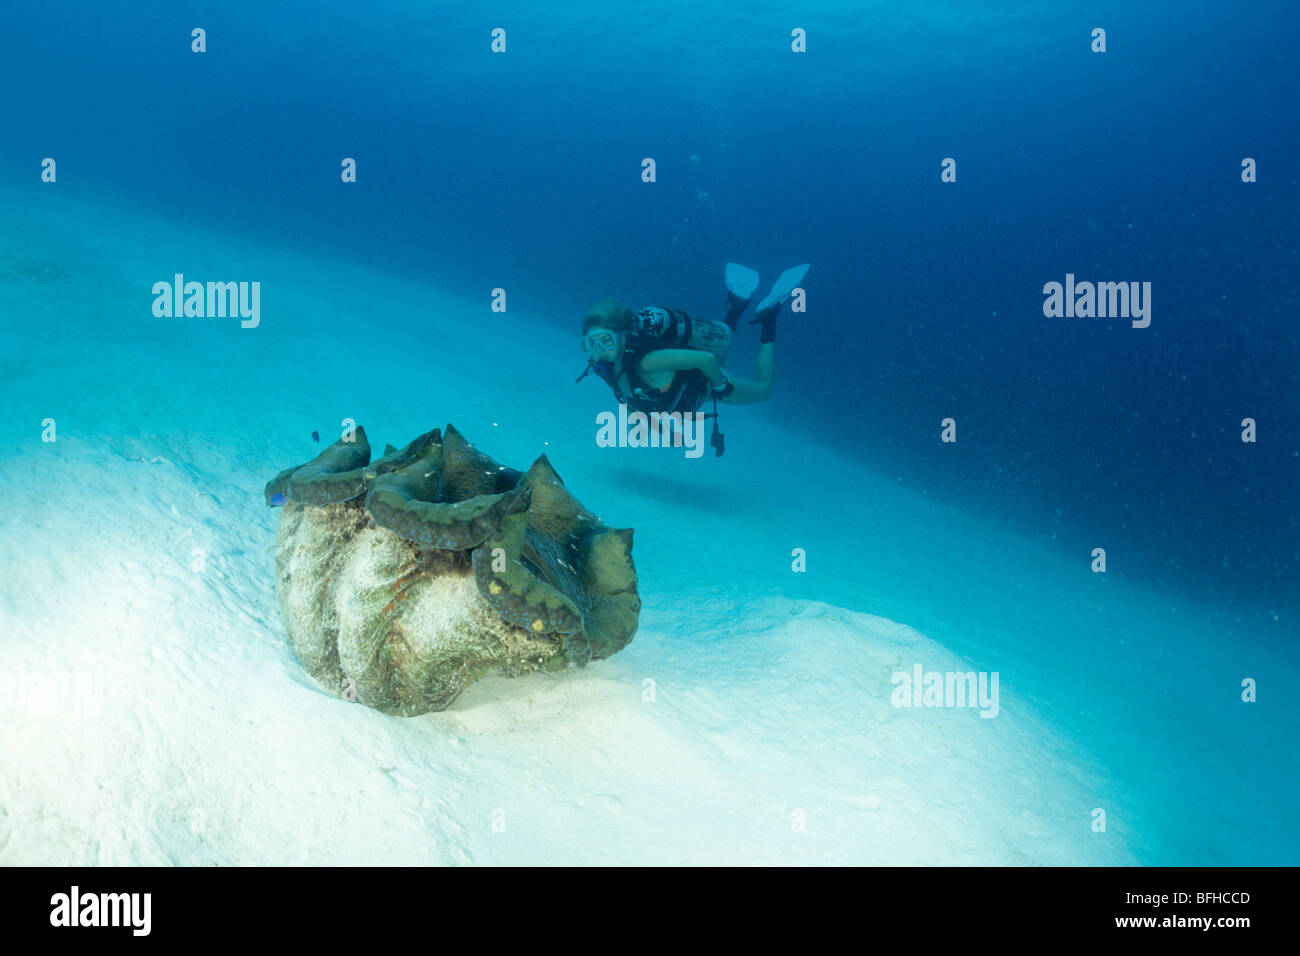 Diver and Giant Clam (Tridacna gigas). Stock Photo